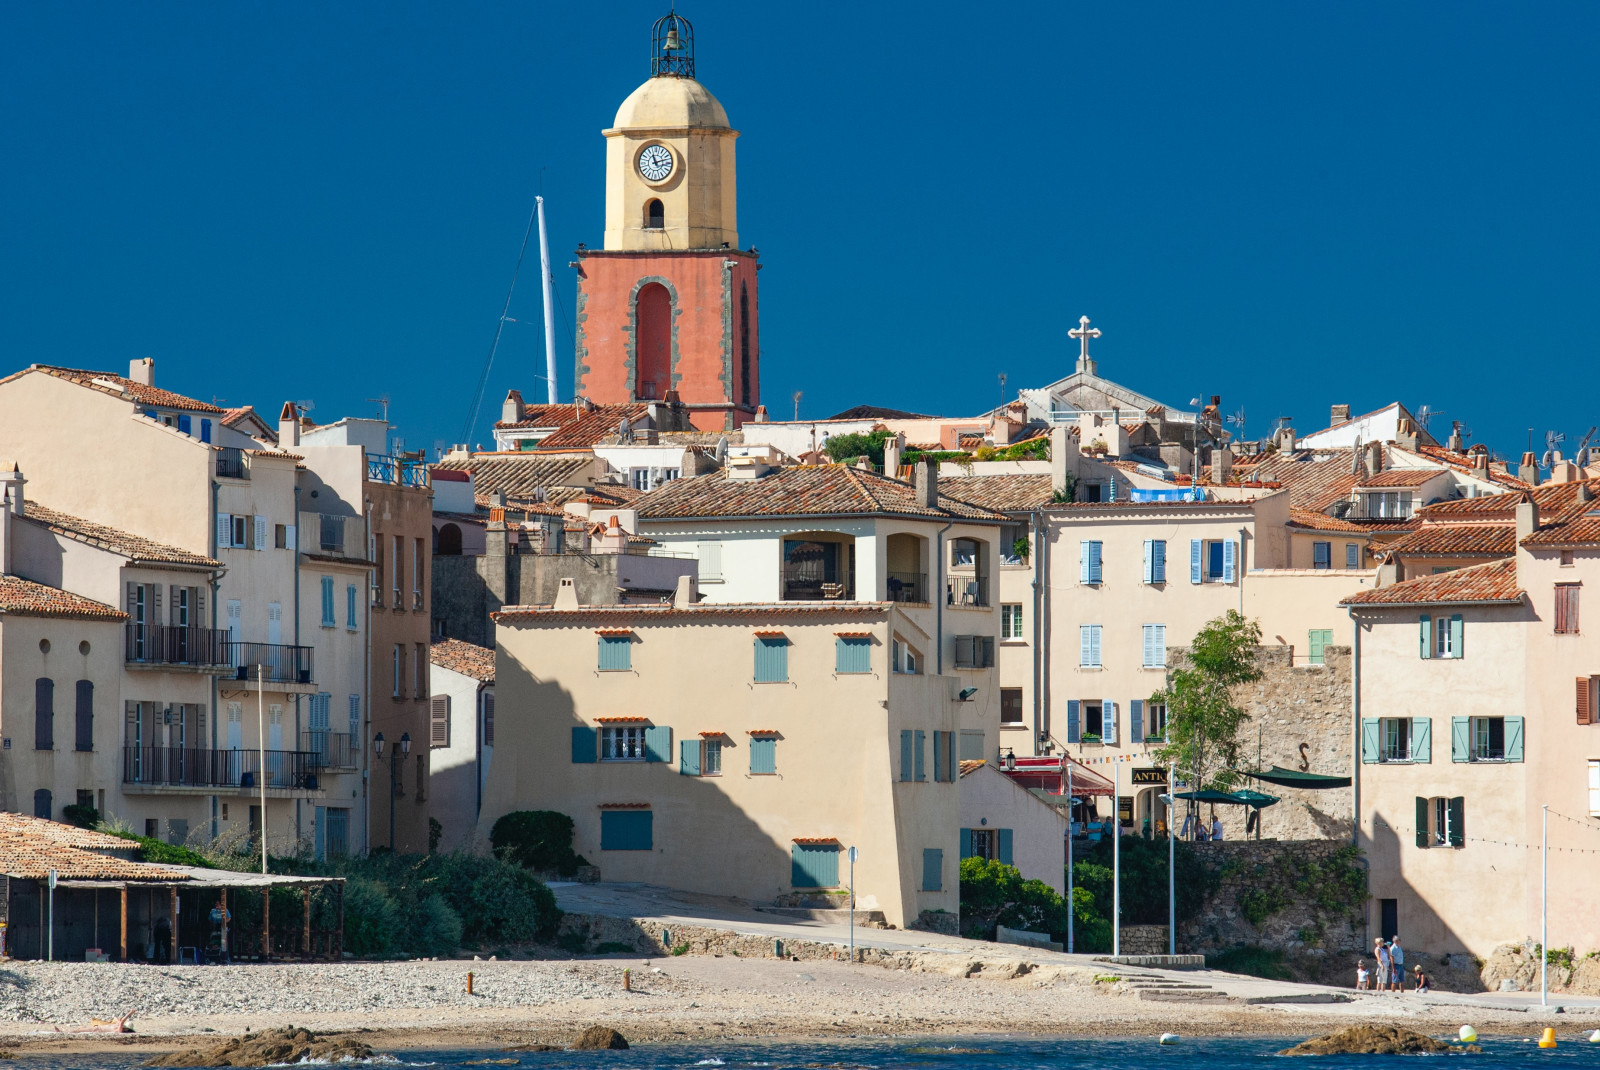 Coastal beach town the the South of France featuring Mediterranean architecture and blue shuttered-windows. 